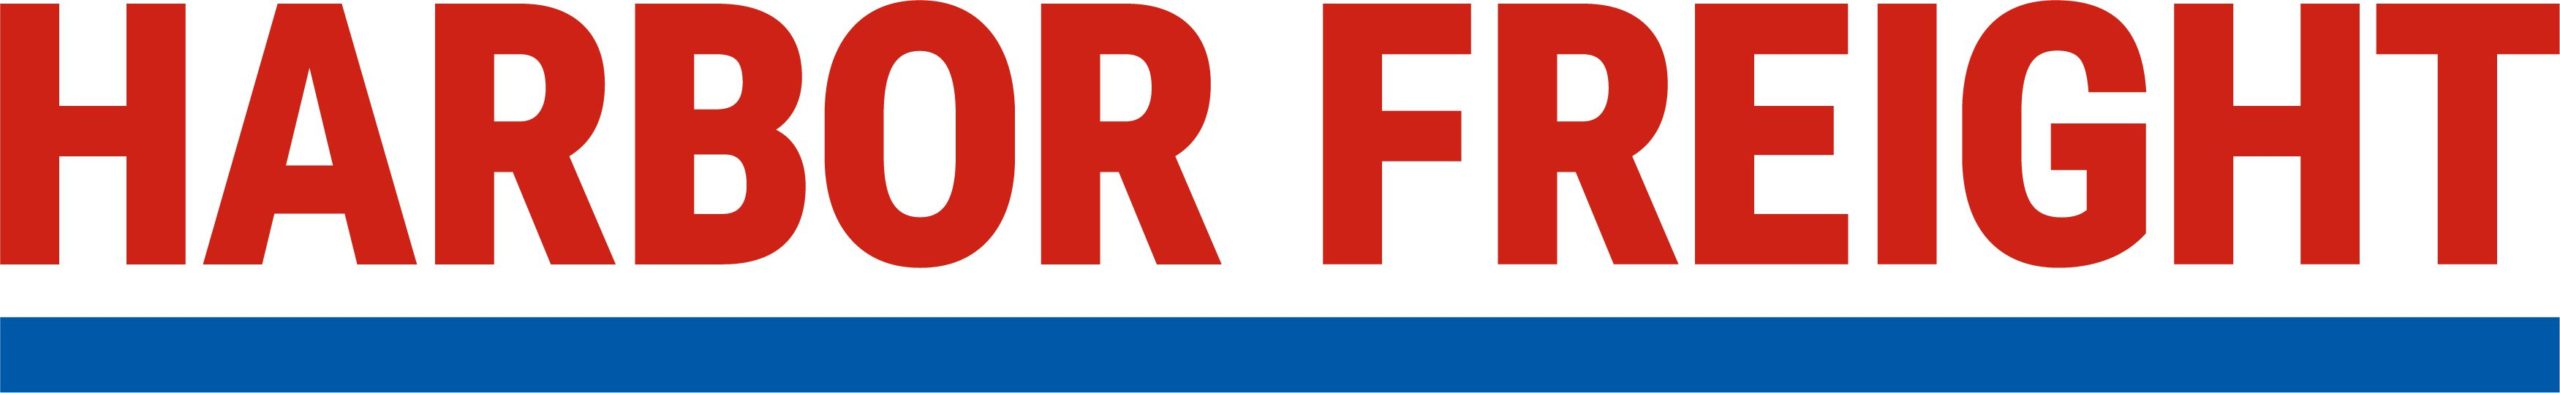 Harbor Freight logo with the company name in bold red letters on a white background, above a solid blue stripe, designed to be easily recognizable on mobile devices.